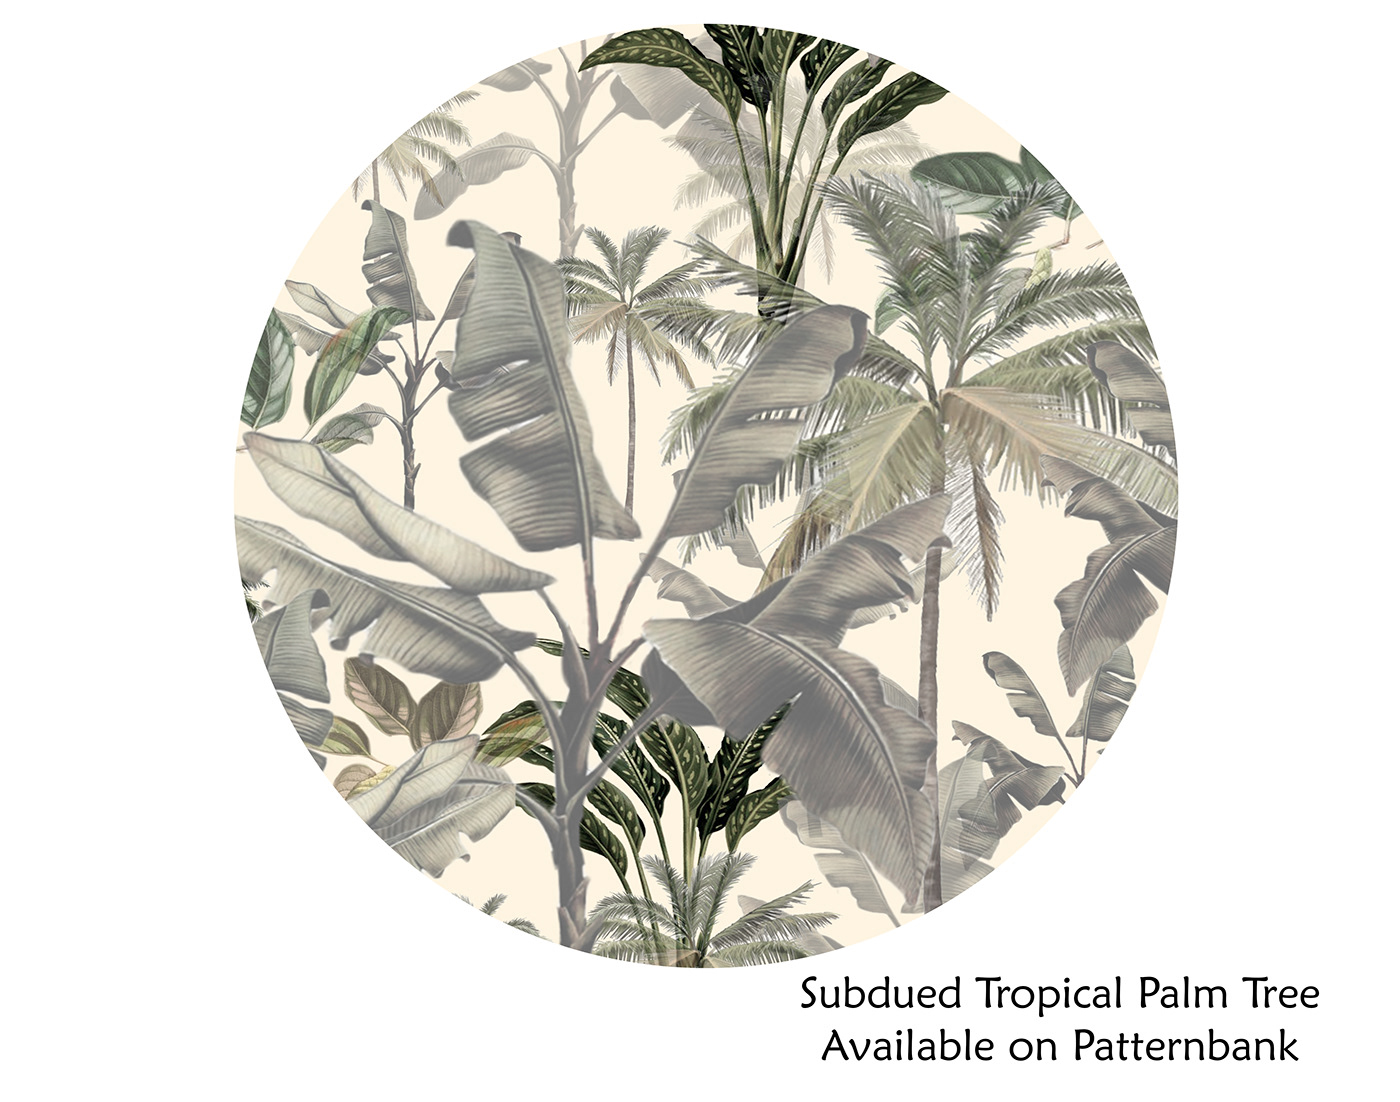 #PALM #patternbank #subdued #tree #tropical  